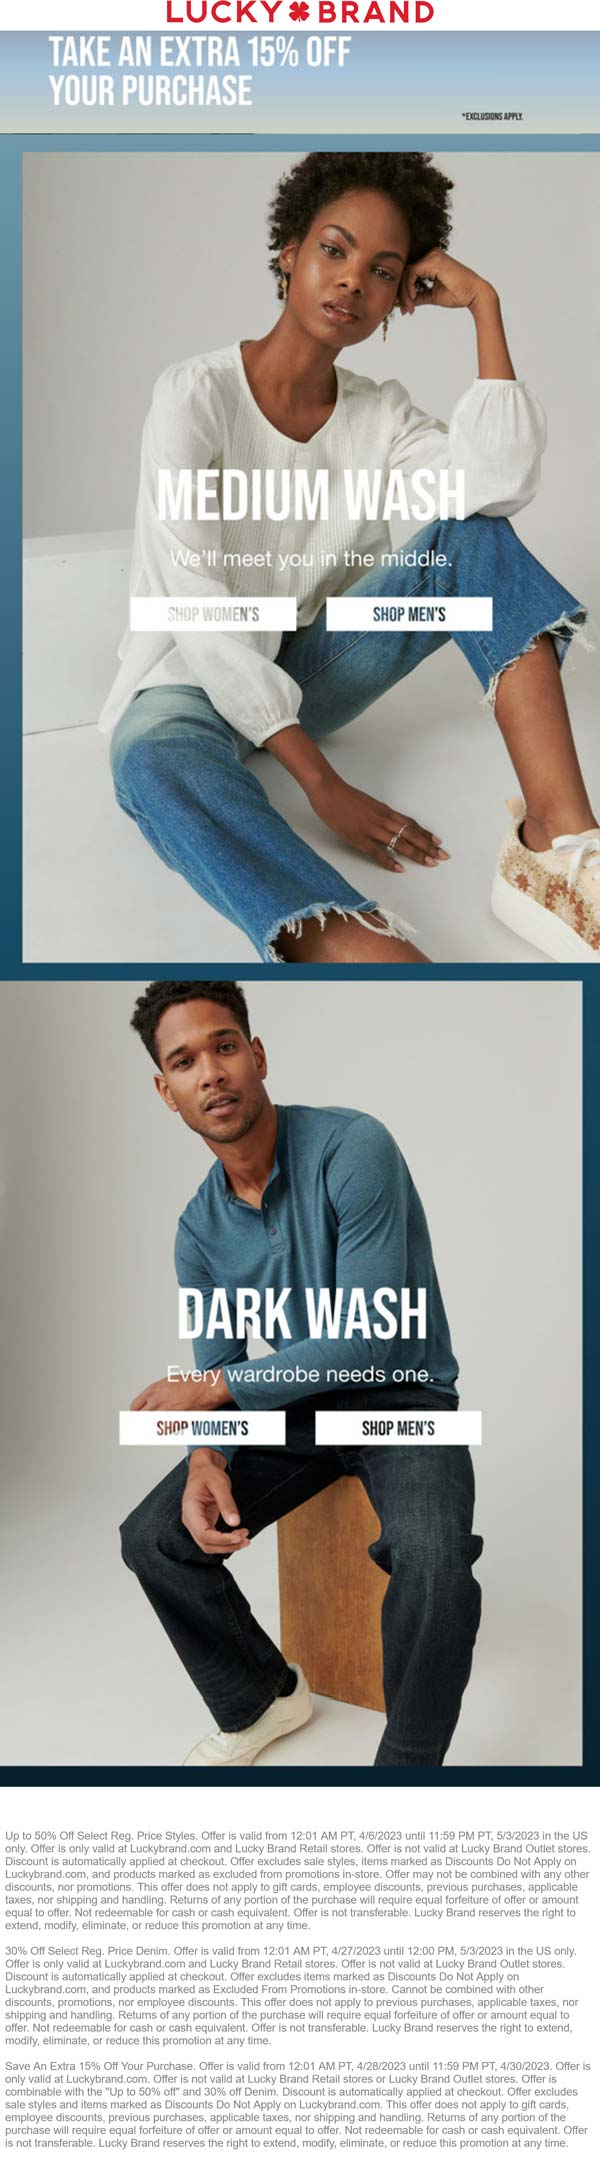 Lucky Brand stores Coupon  30-45% off denim at Lucky Brand, ditto online #luckybrand 